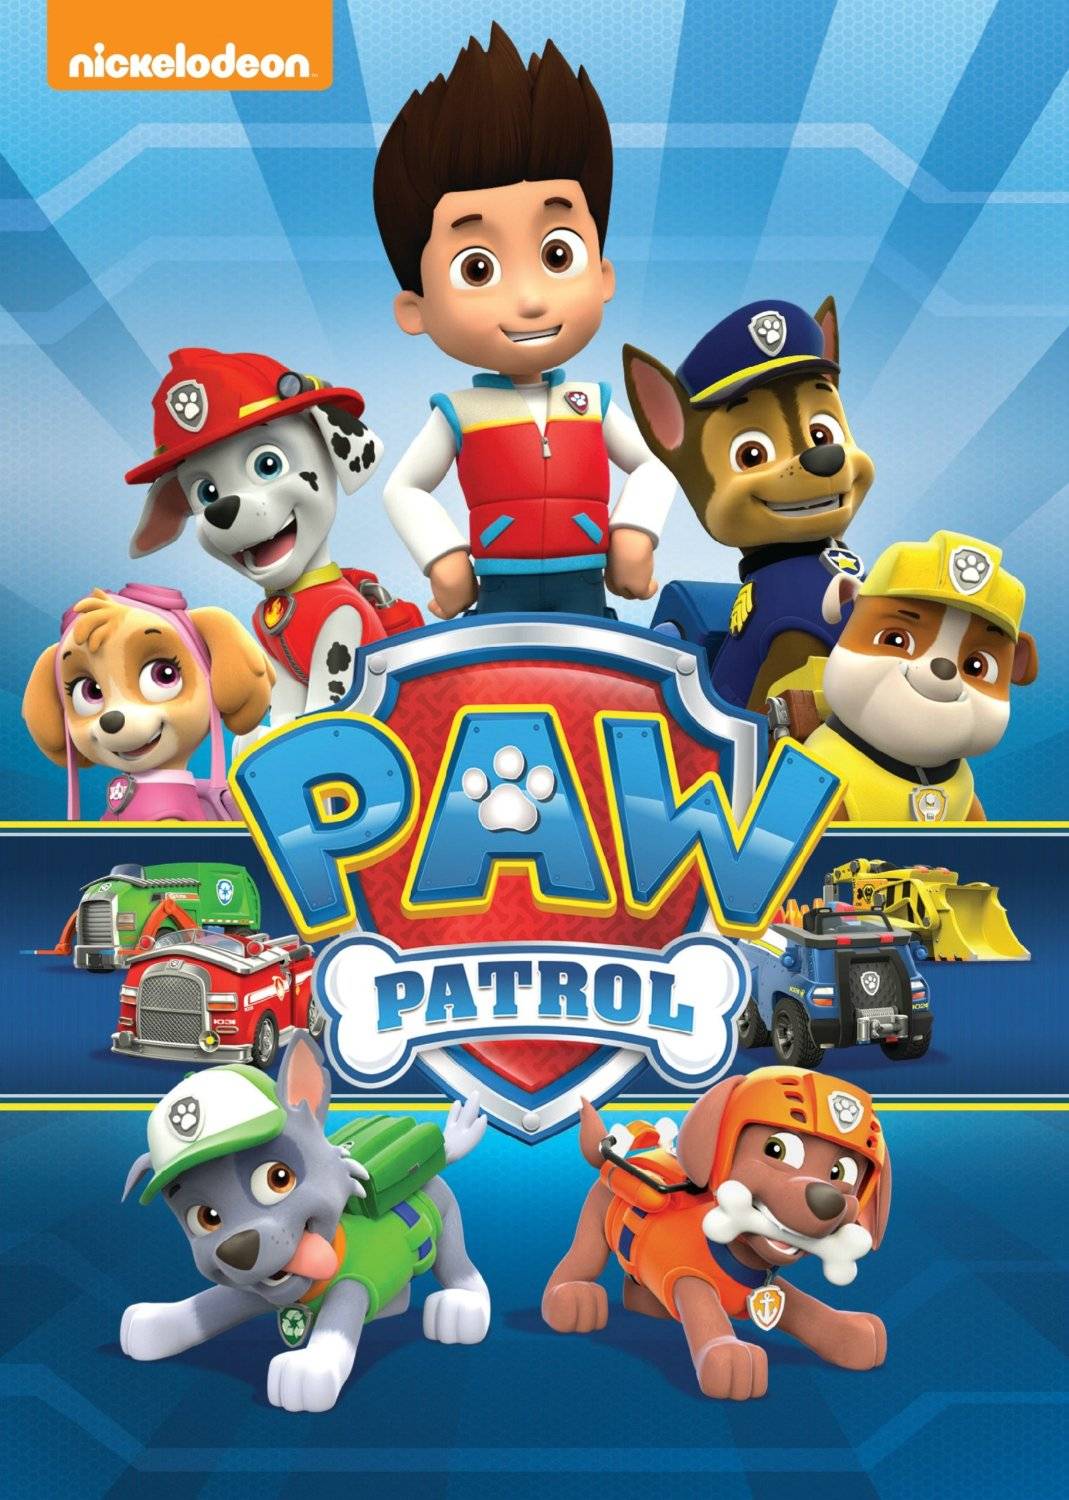 Widescreen Wallpapers of Paw Patrol   Wonderful Backgrounds